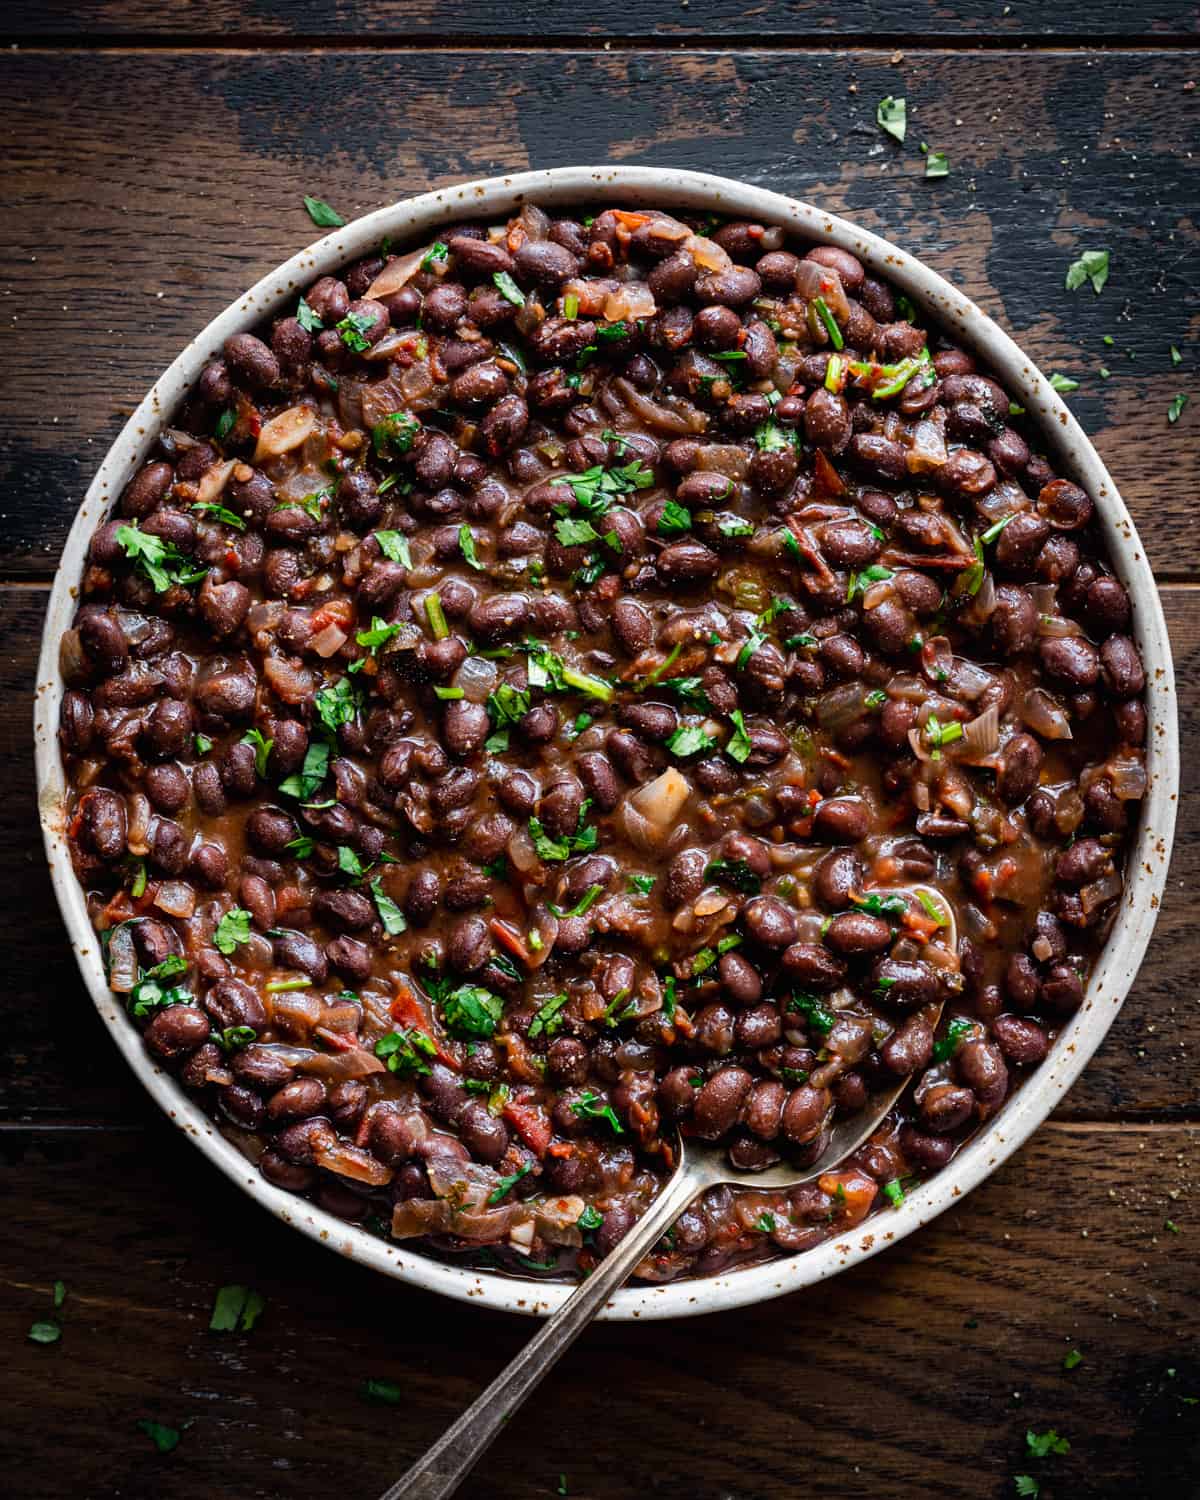 Overhead view of shallow tan bowl filled with black beans on a wooden table.